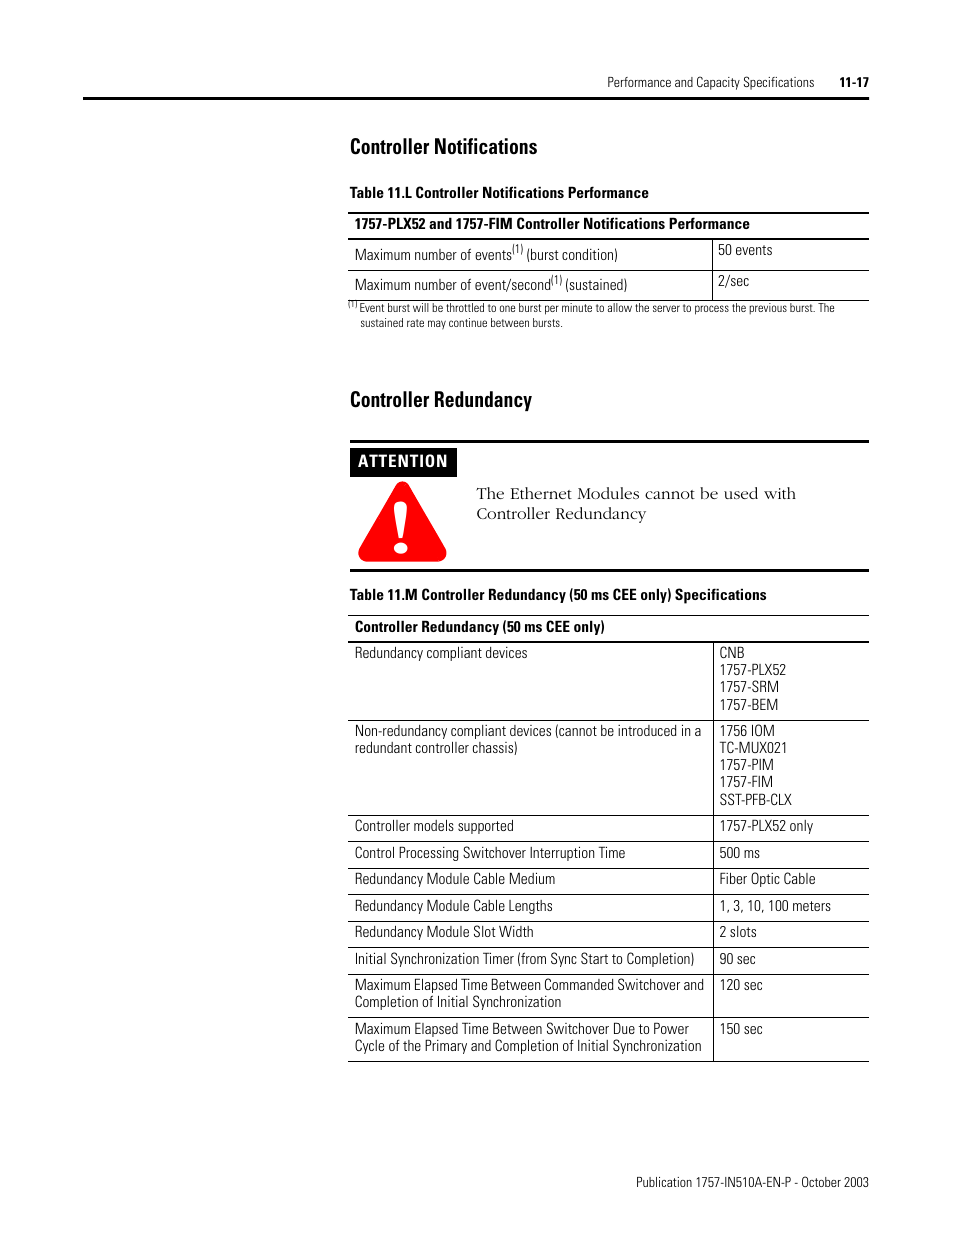 Controller notifications, Controller redundancy, Controller notifications controller redundancy | Rockwell Automation 1757-SWKIT5100 ProcessLogix R510.0 Installation and Upgrade Guide User Manual | Page 257 / 271